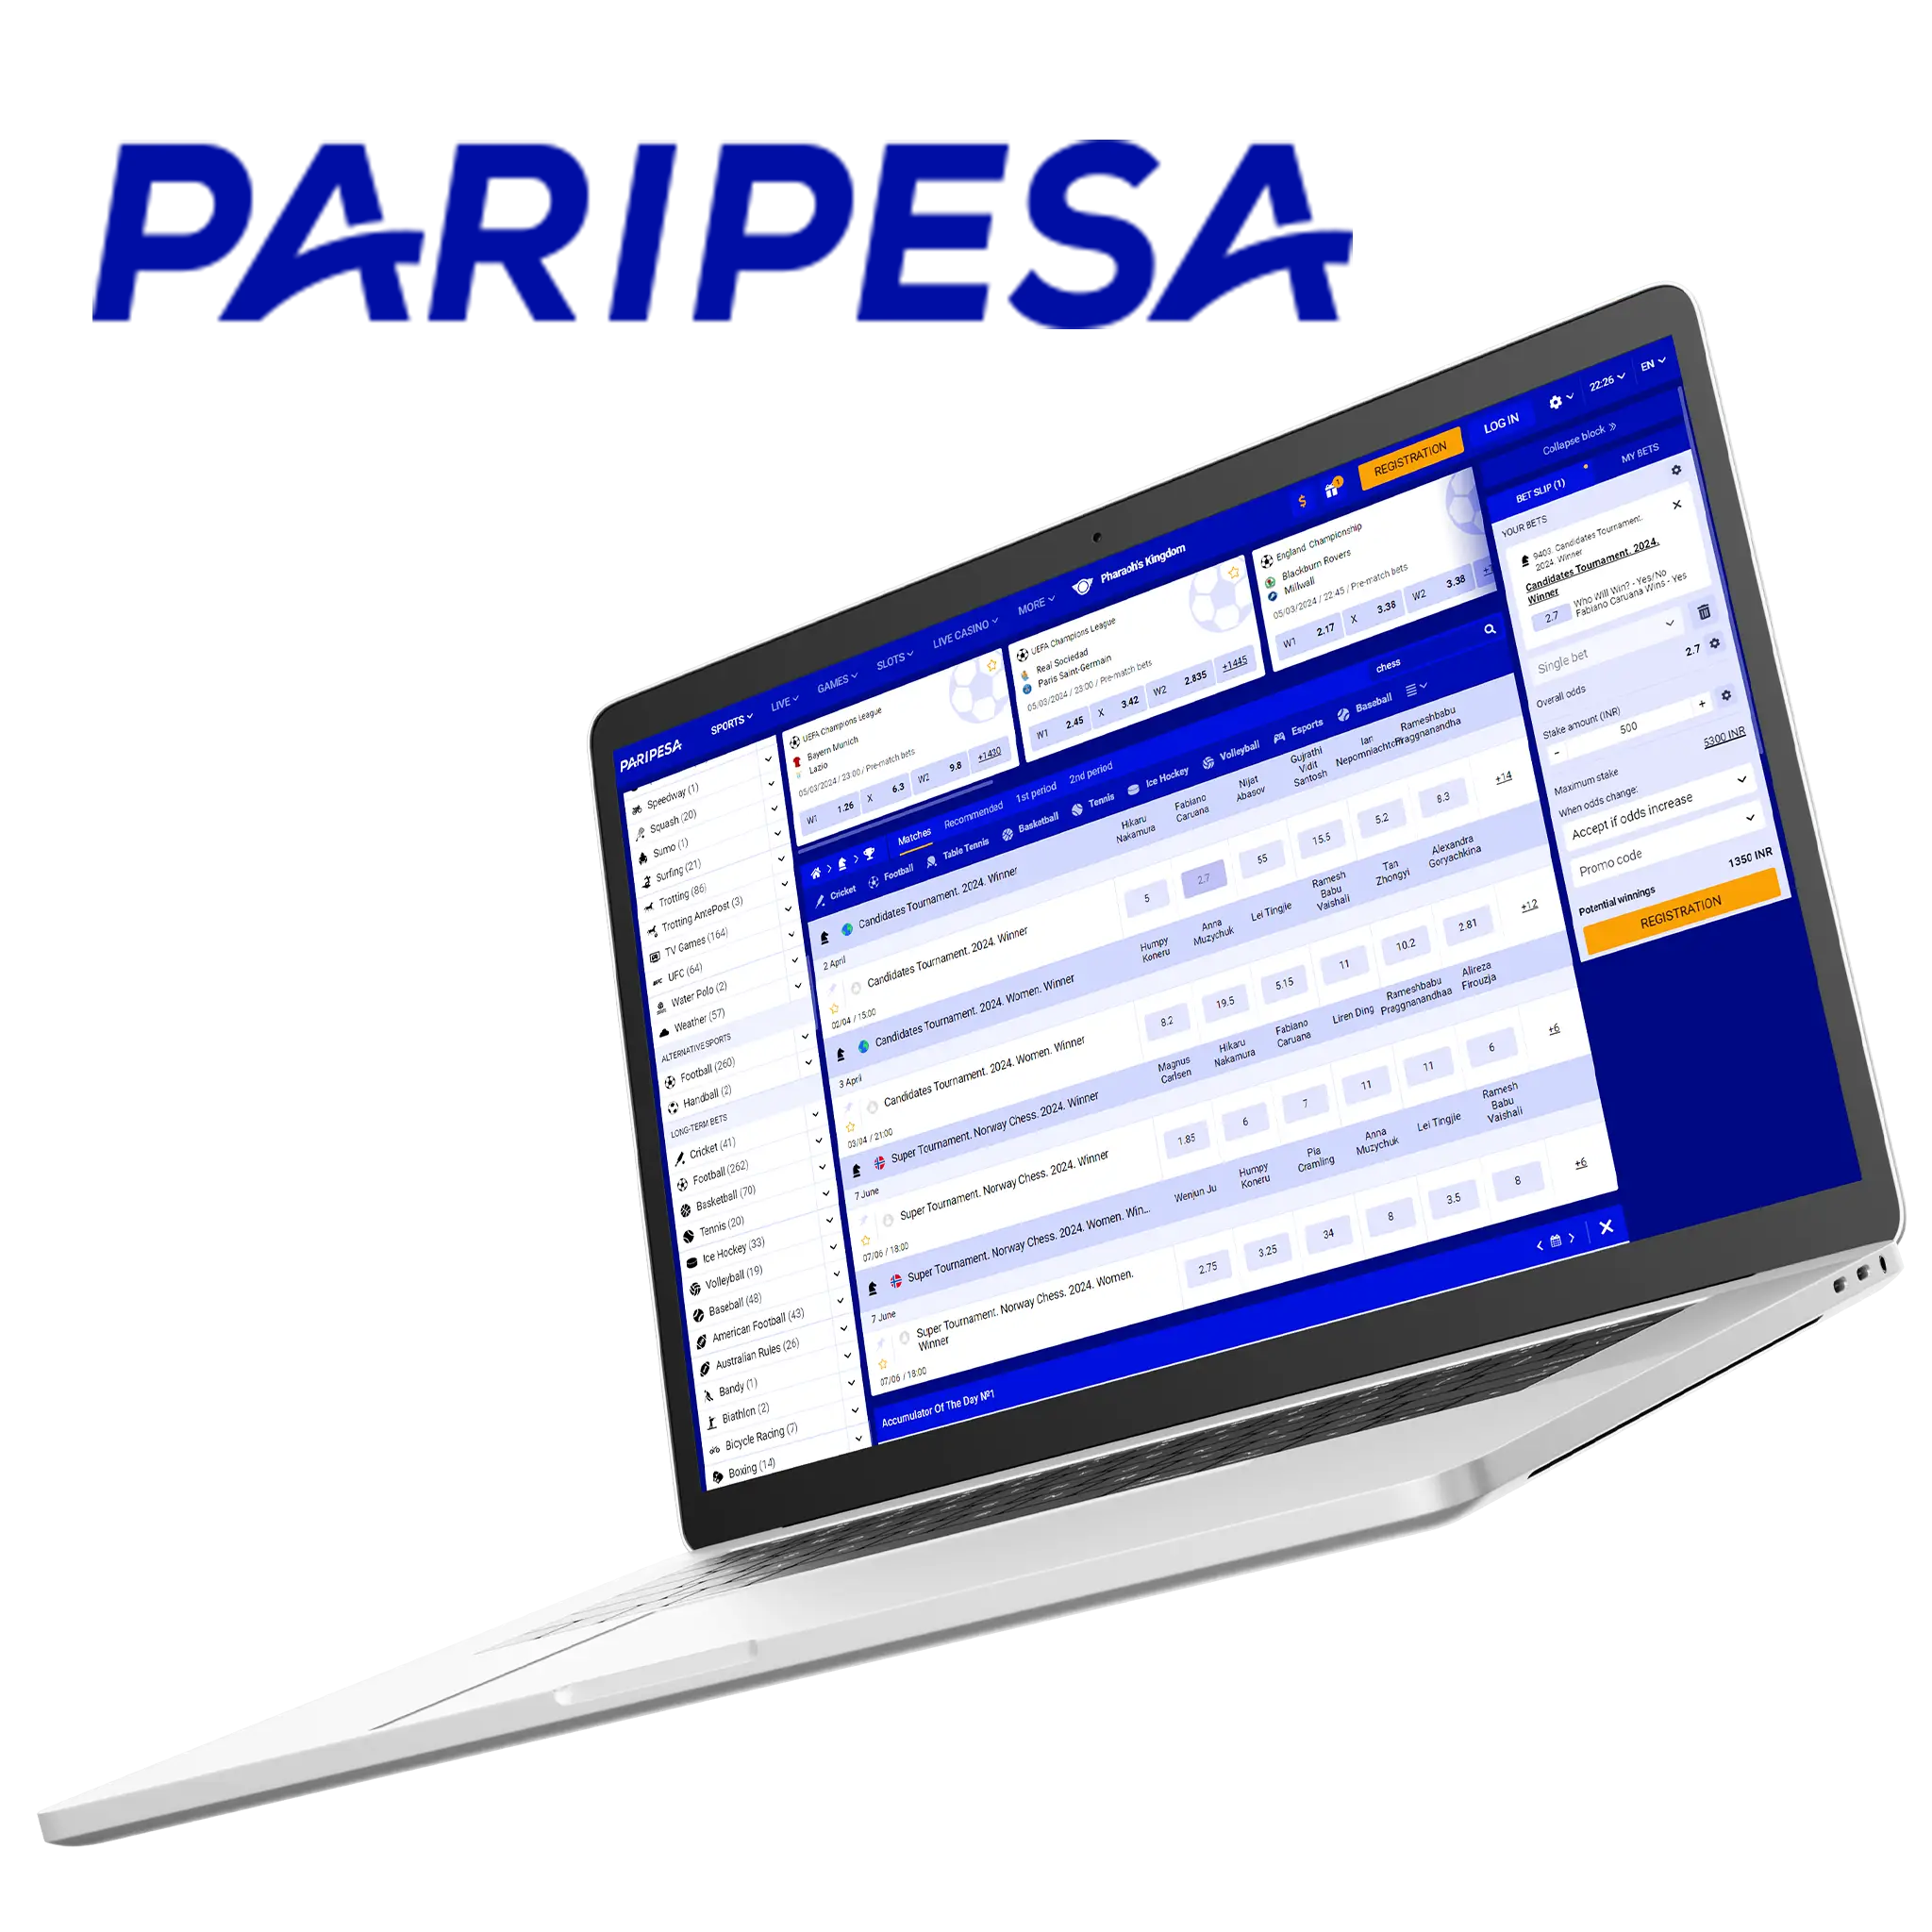 Paripesa offers a wide range of different chess events for betting.